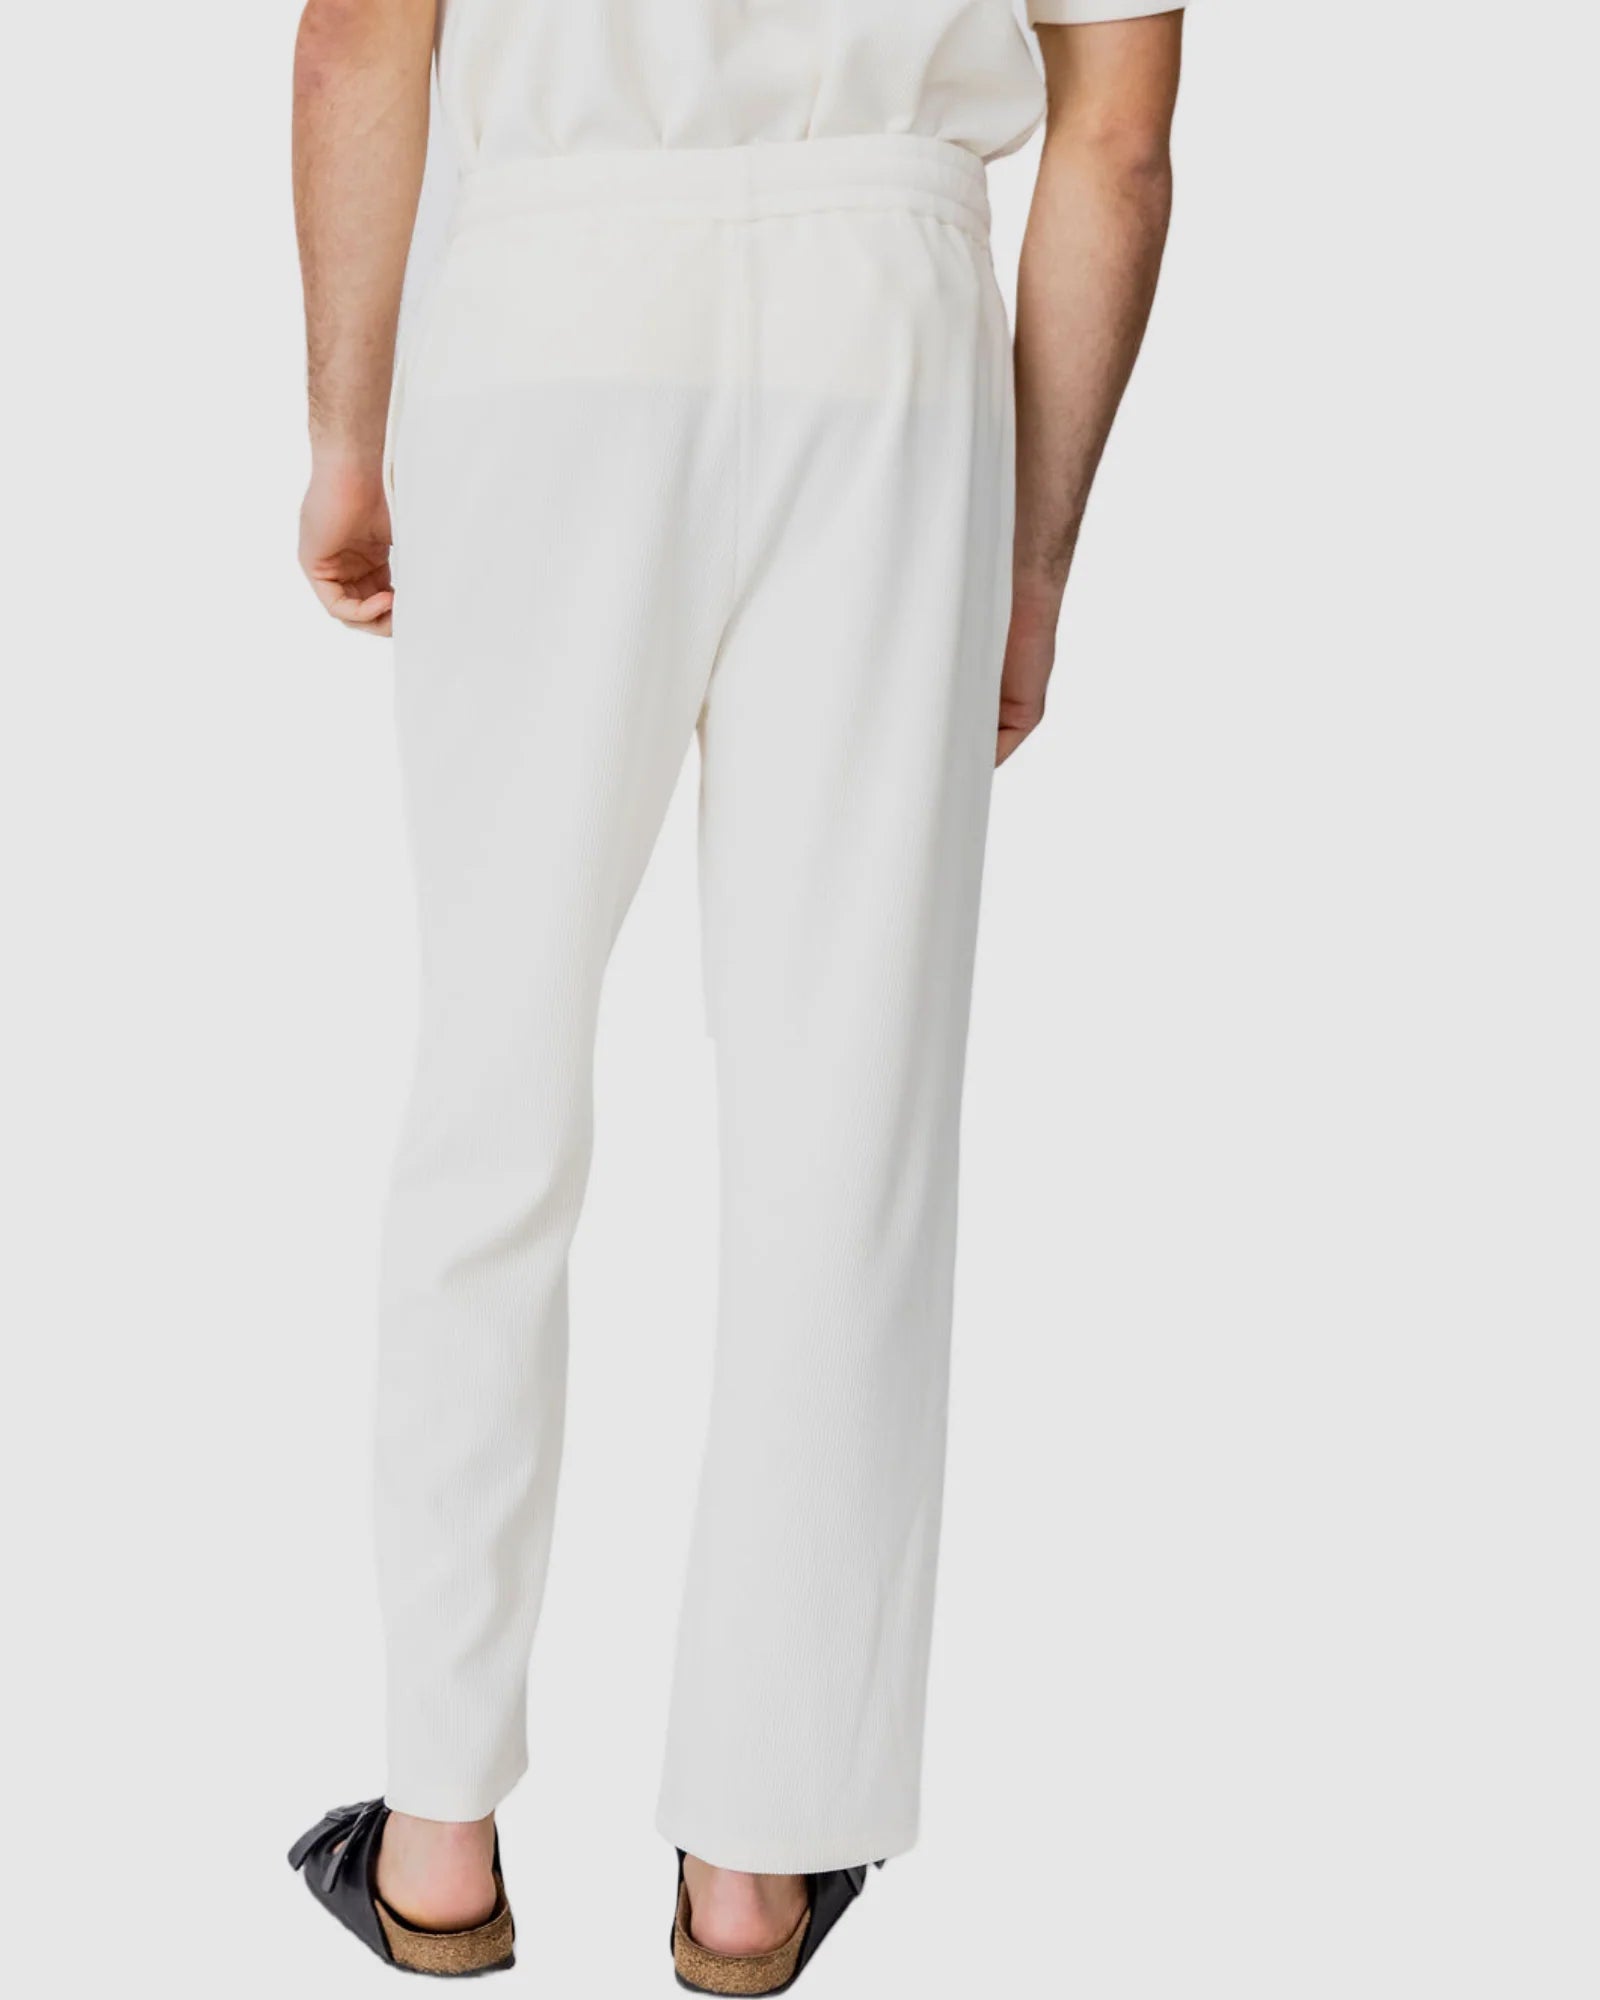 Justin Cassin Palma Loose Ribbed Pant in Cream Color 4